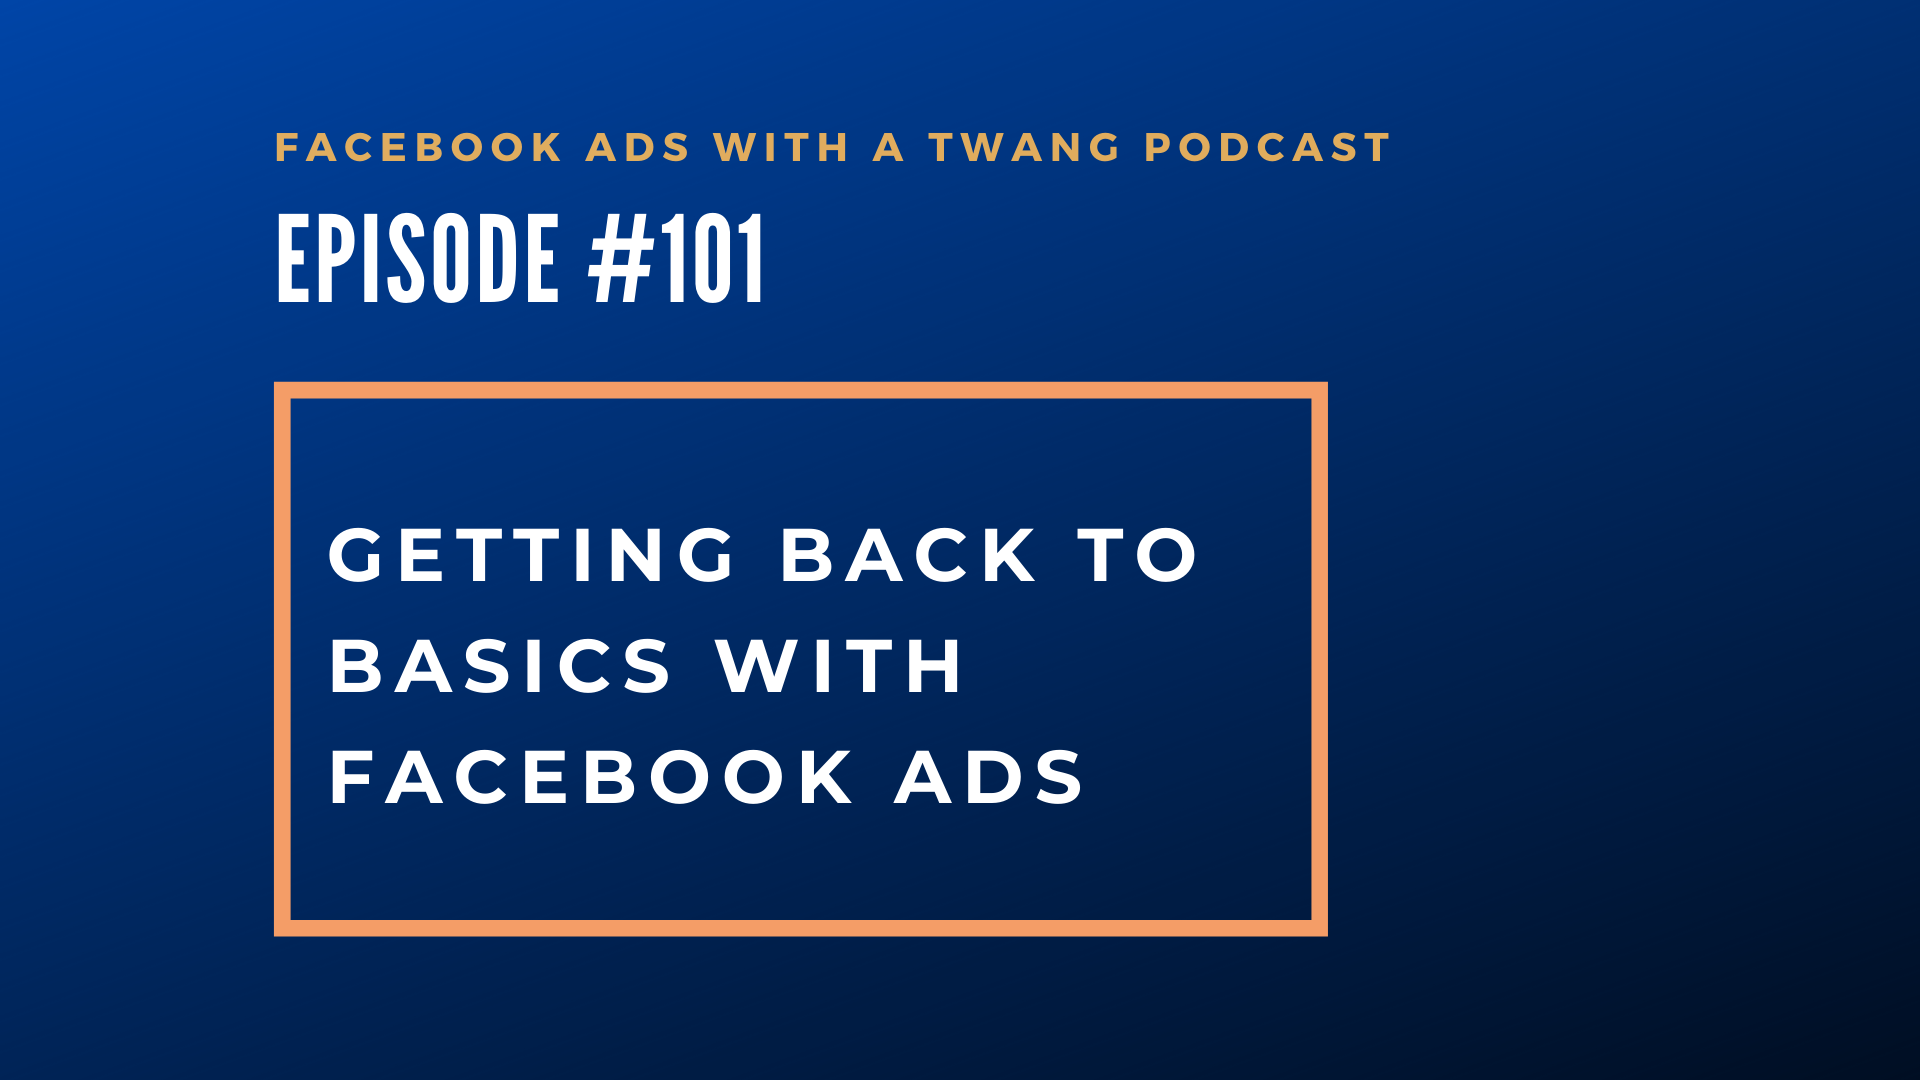 Getting back to basics with Facebook ads